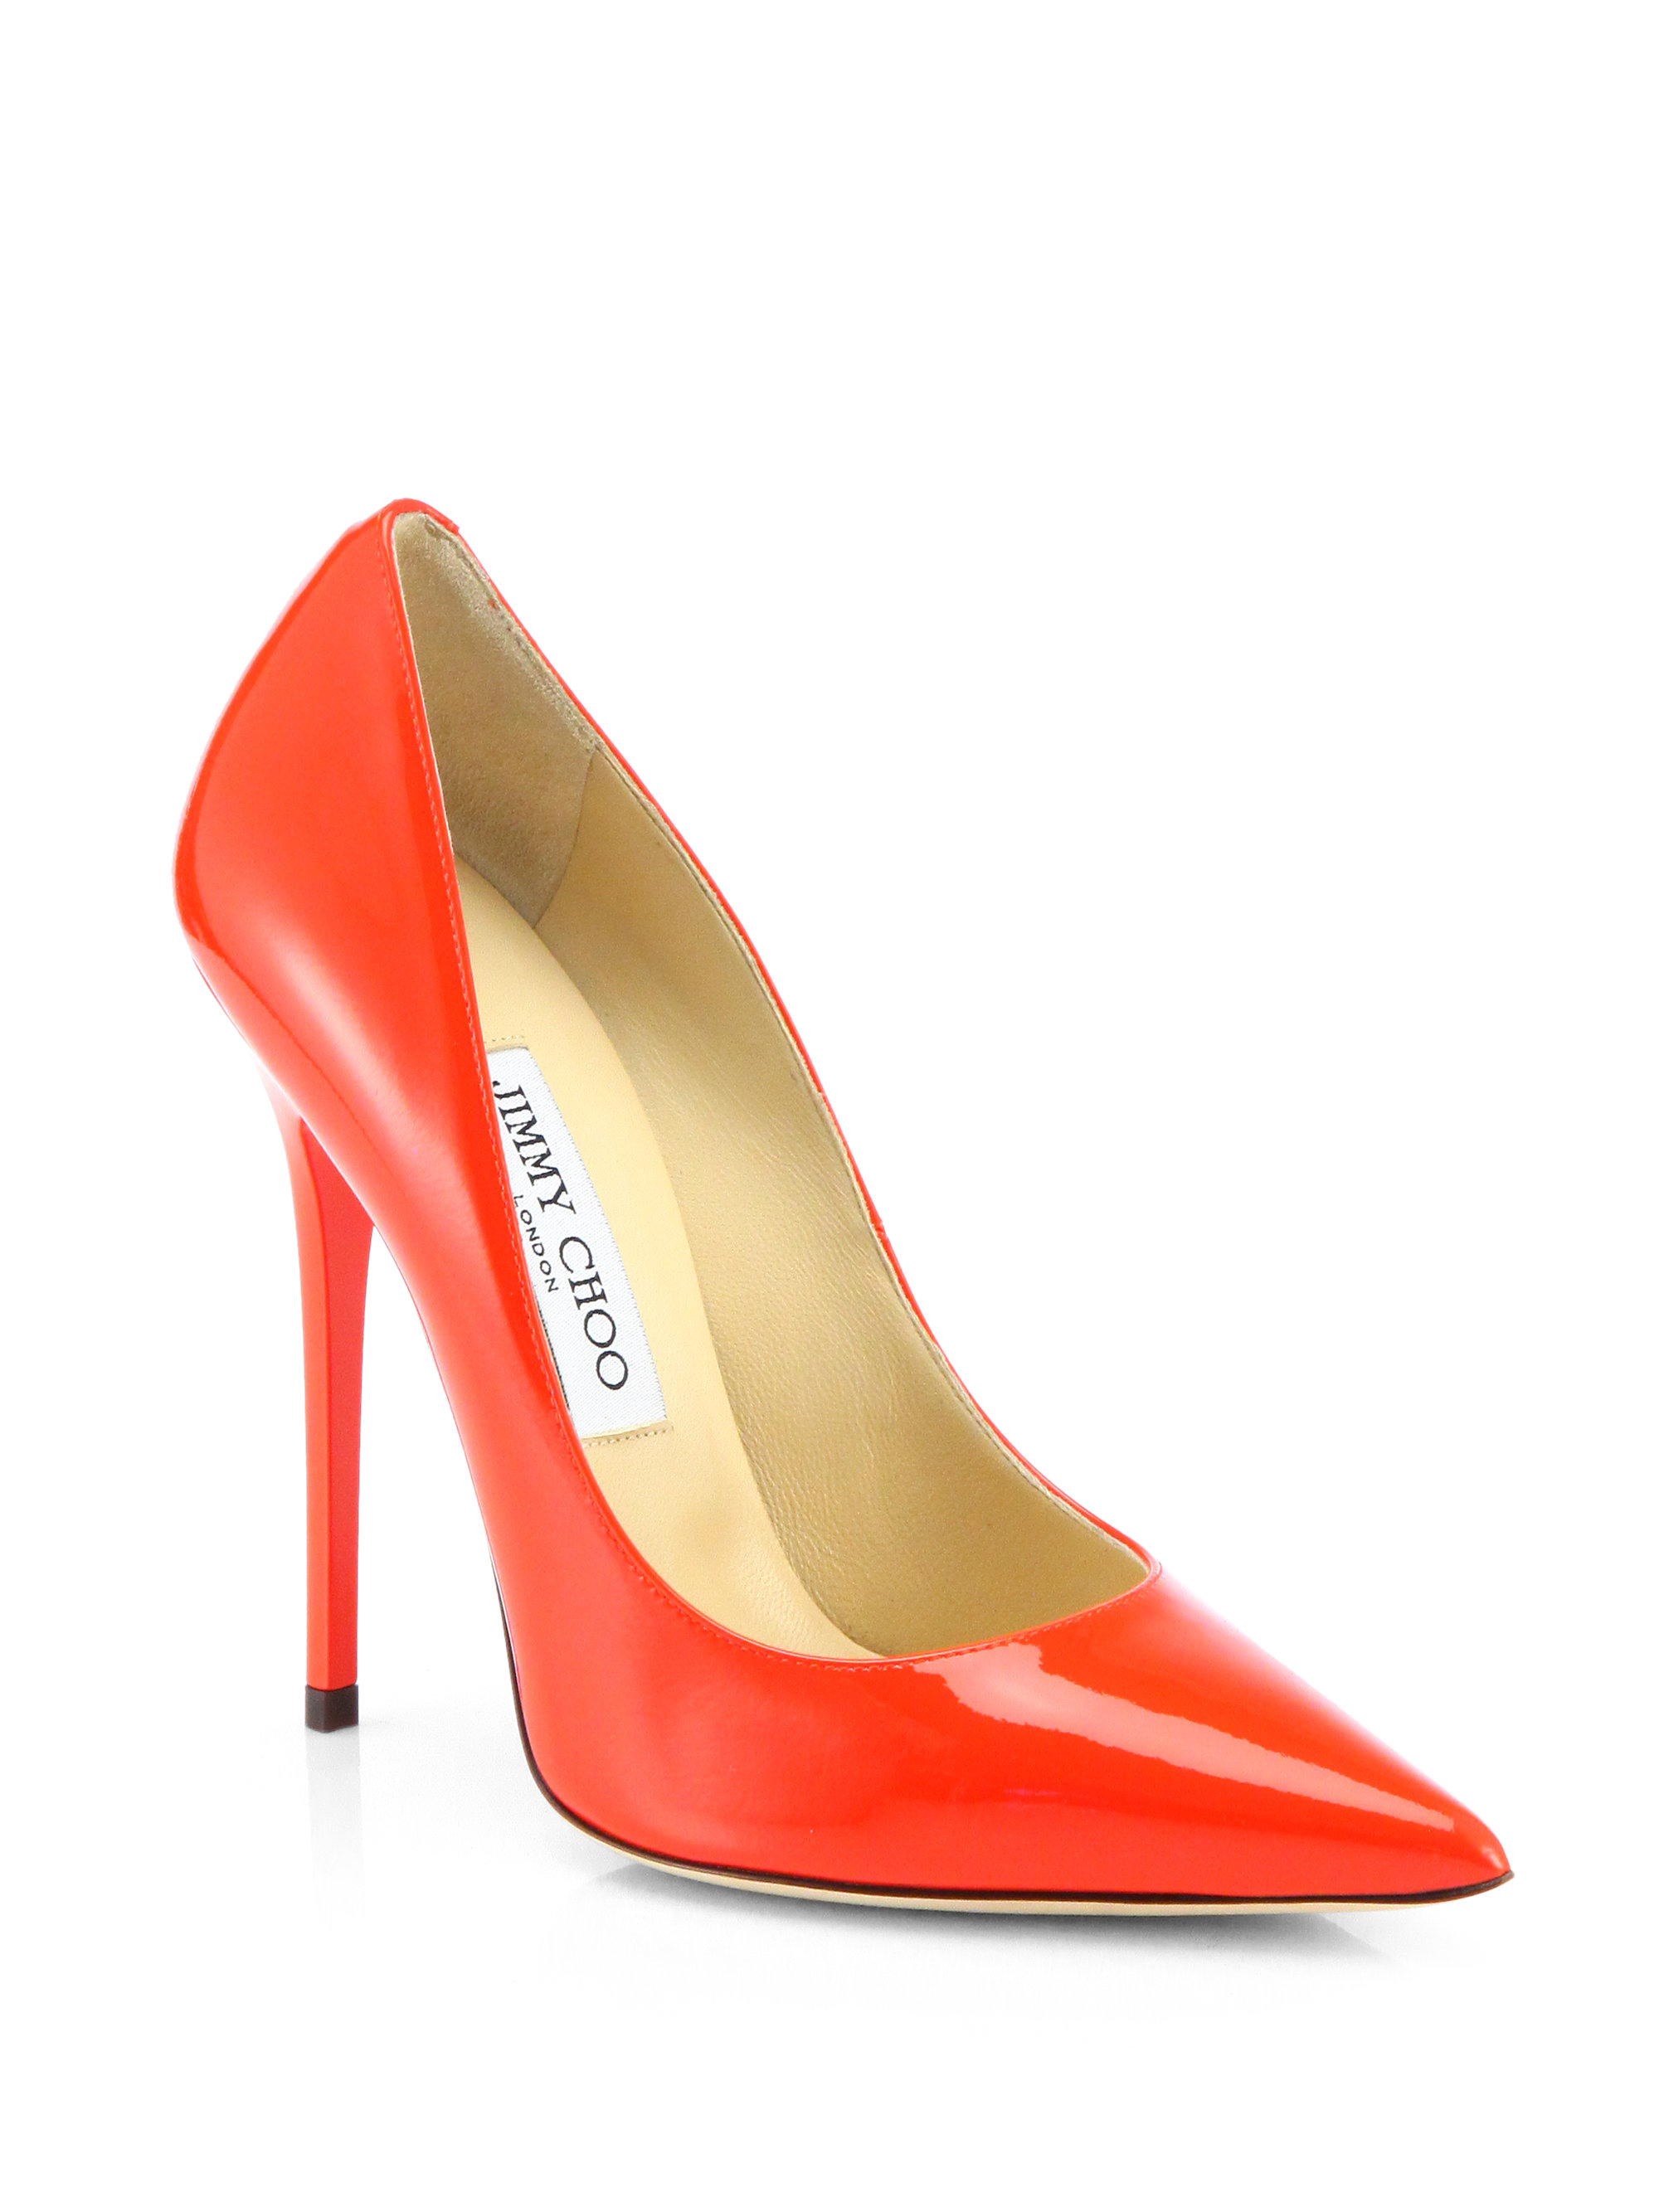 Jimmy Choo Anouk Patent Leather Pumps in Red (FLAME) | Lyst